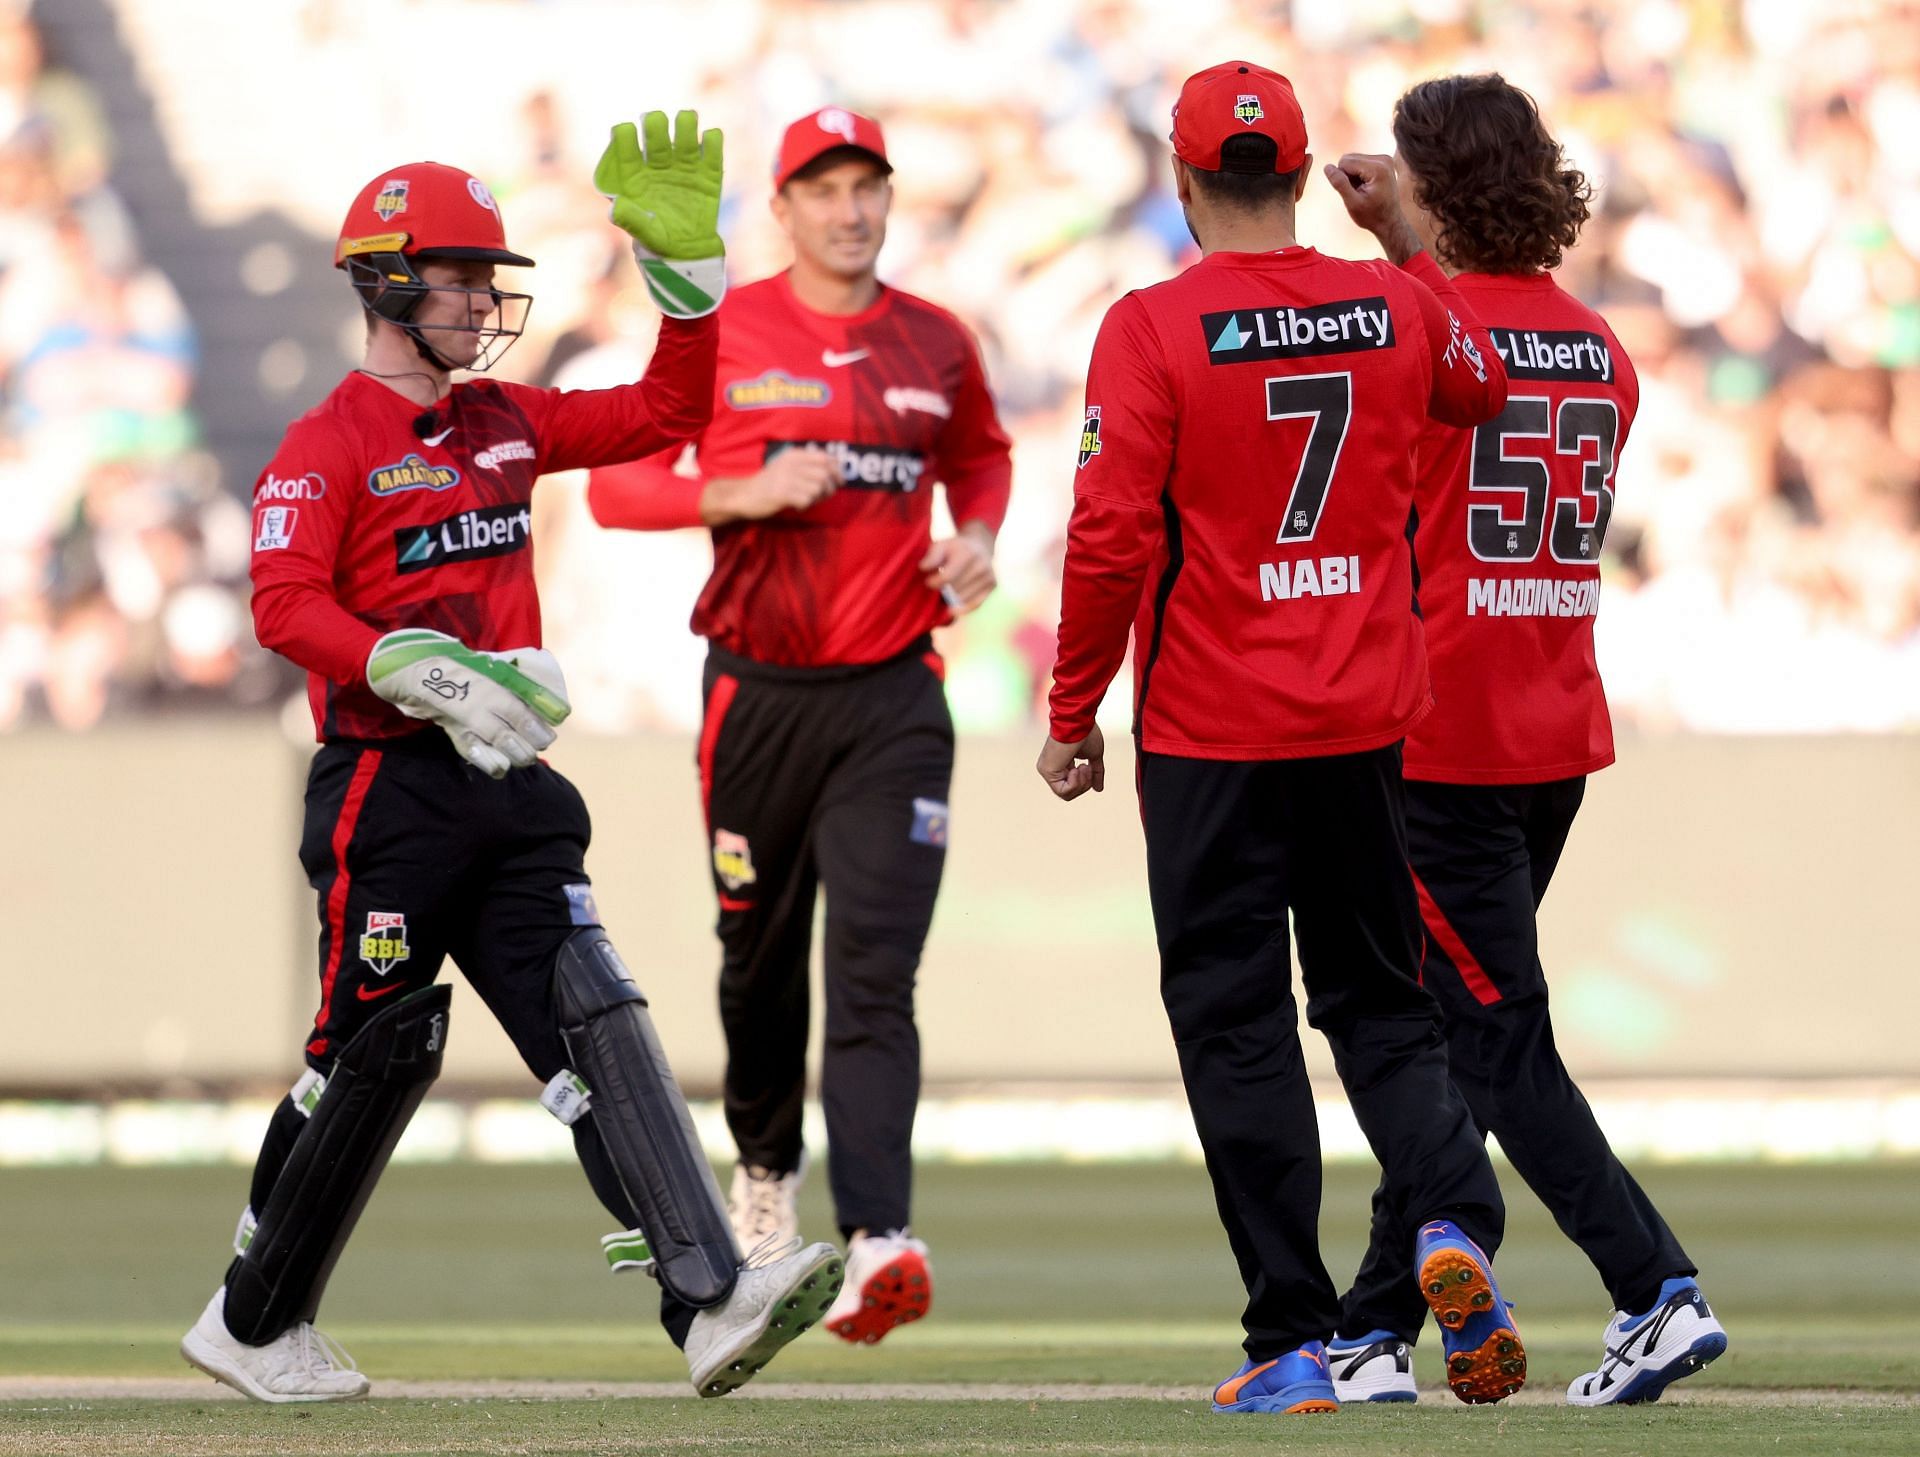 The Renegades will be looking to get their third win of the season against the Heat.